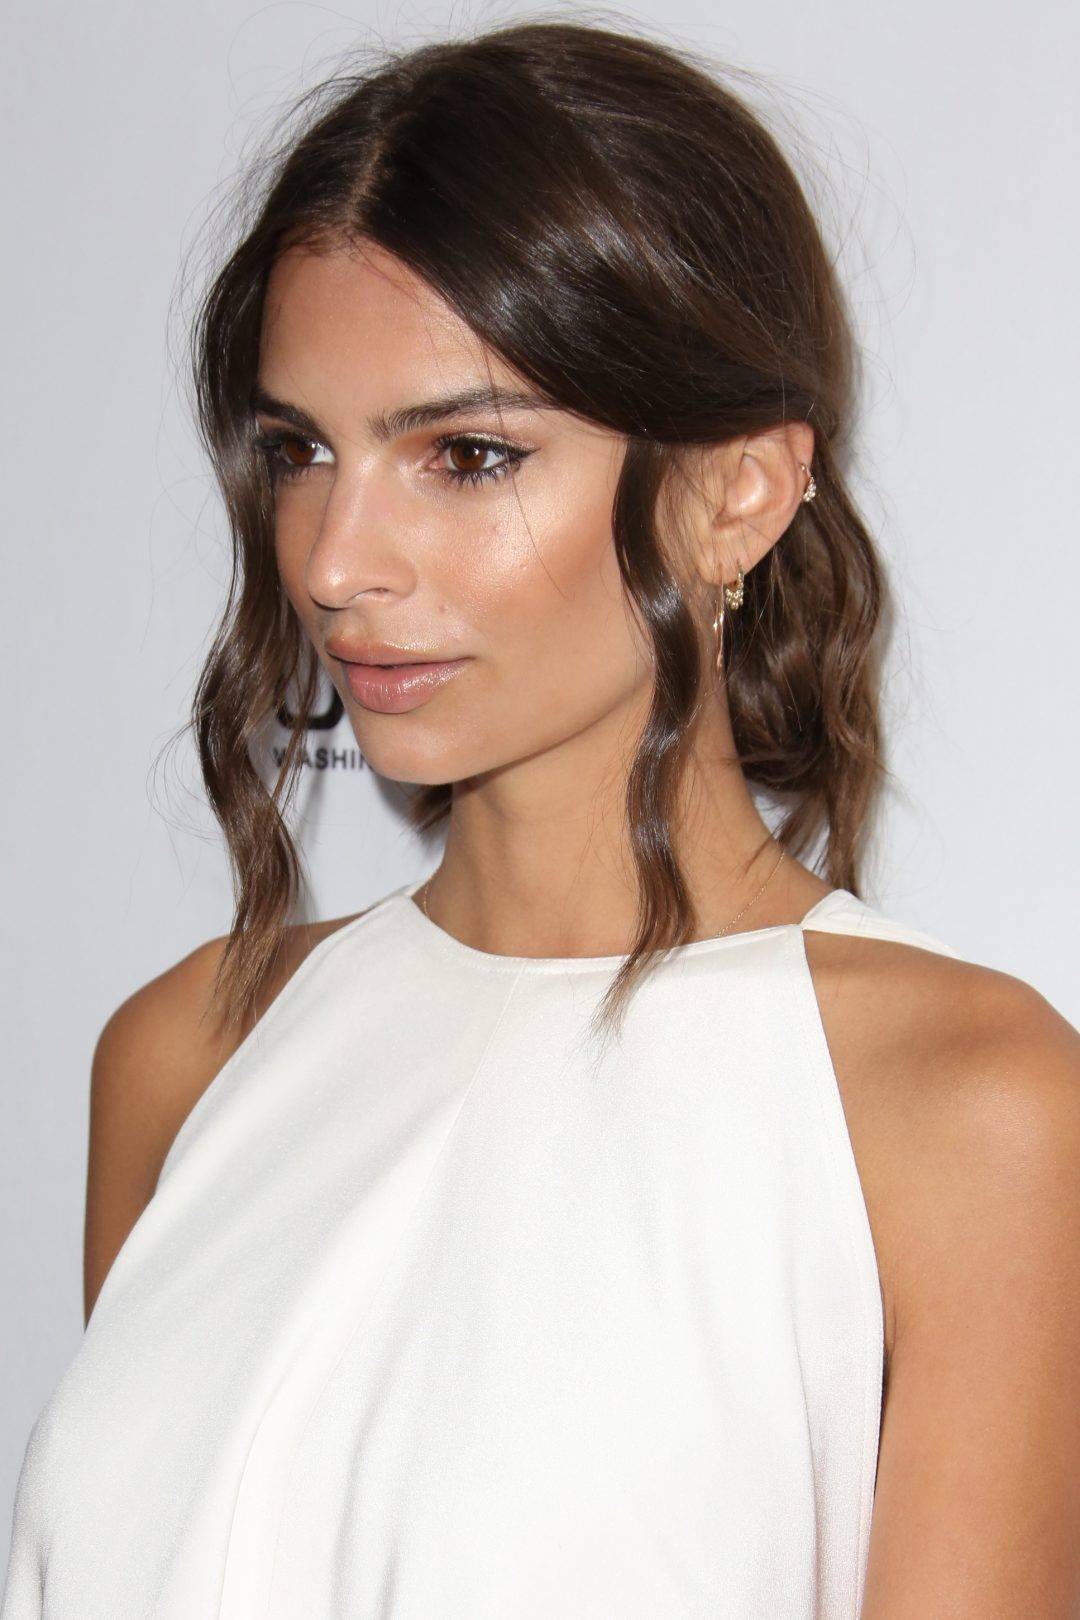 Emily Ratajkowski with low pony tail and curled hair around face